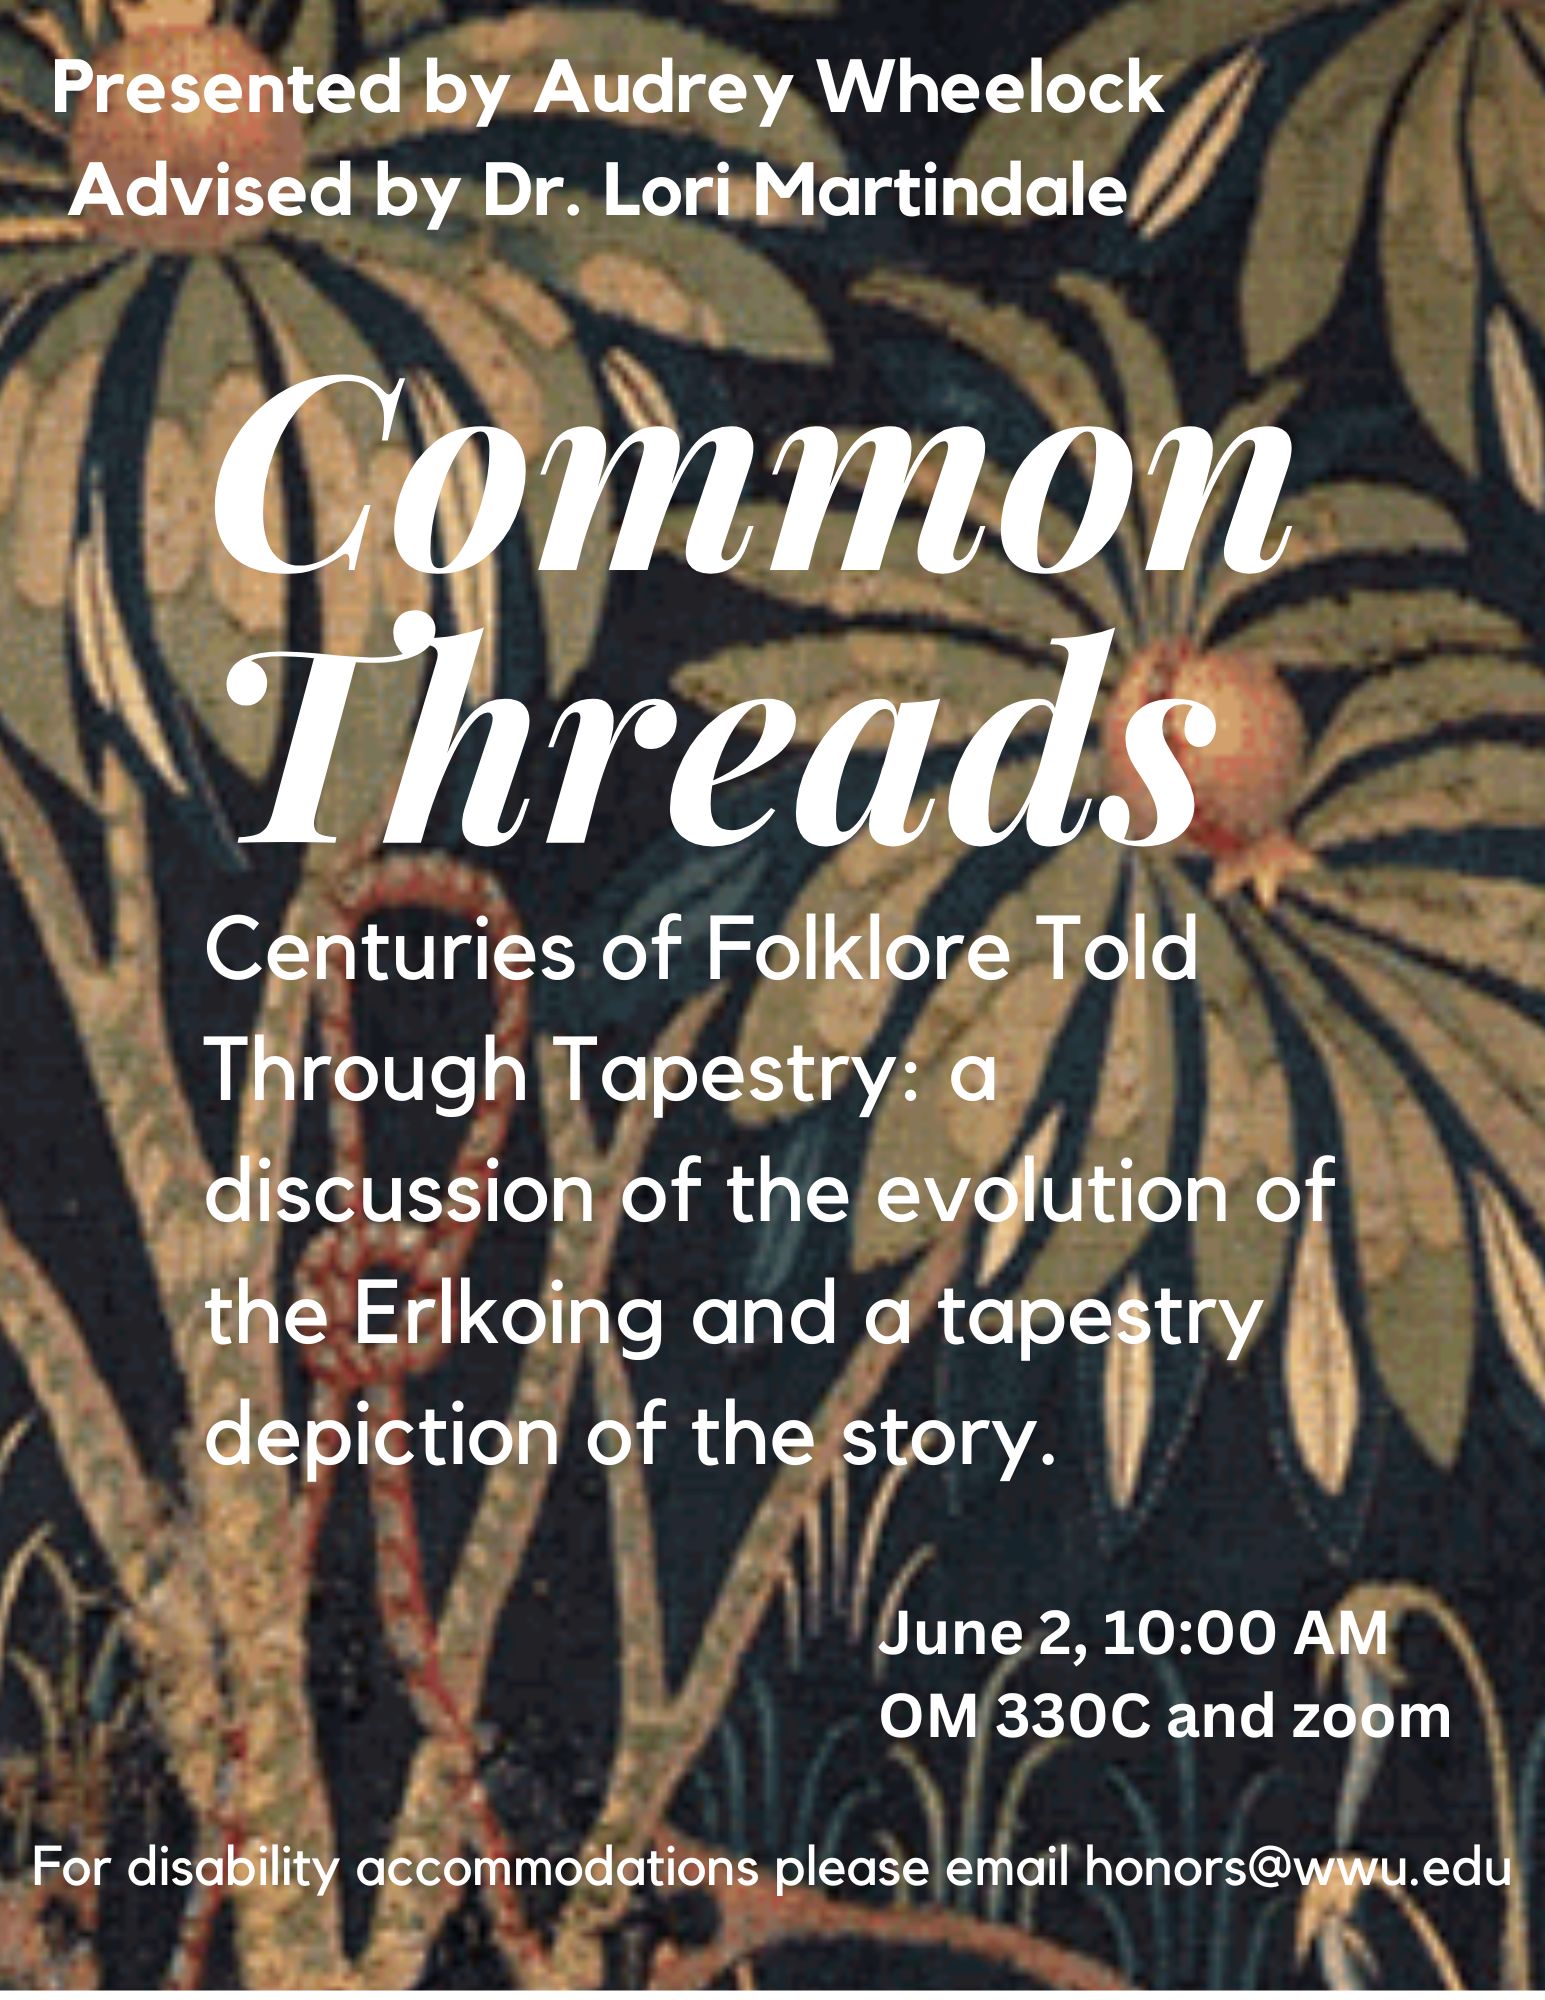 The background is a close-up of a tapestry, with a dark blue background and stitched plants. White text in the center reads: "Common Threads. Centuries of Folklore Told Through Tapestry: a discussion of the evolution of the Erlkoing and a tapestry depiction of the story." Above in white text: "Presented by Audrey Wheelock, Advised by Dr. Lori Martindale". Below in white text: "June 2, 10 AM, OM 330C and zoom. For disability accommodations please email honors@wwu.edu."